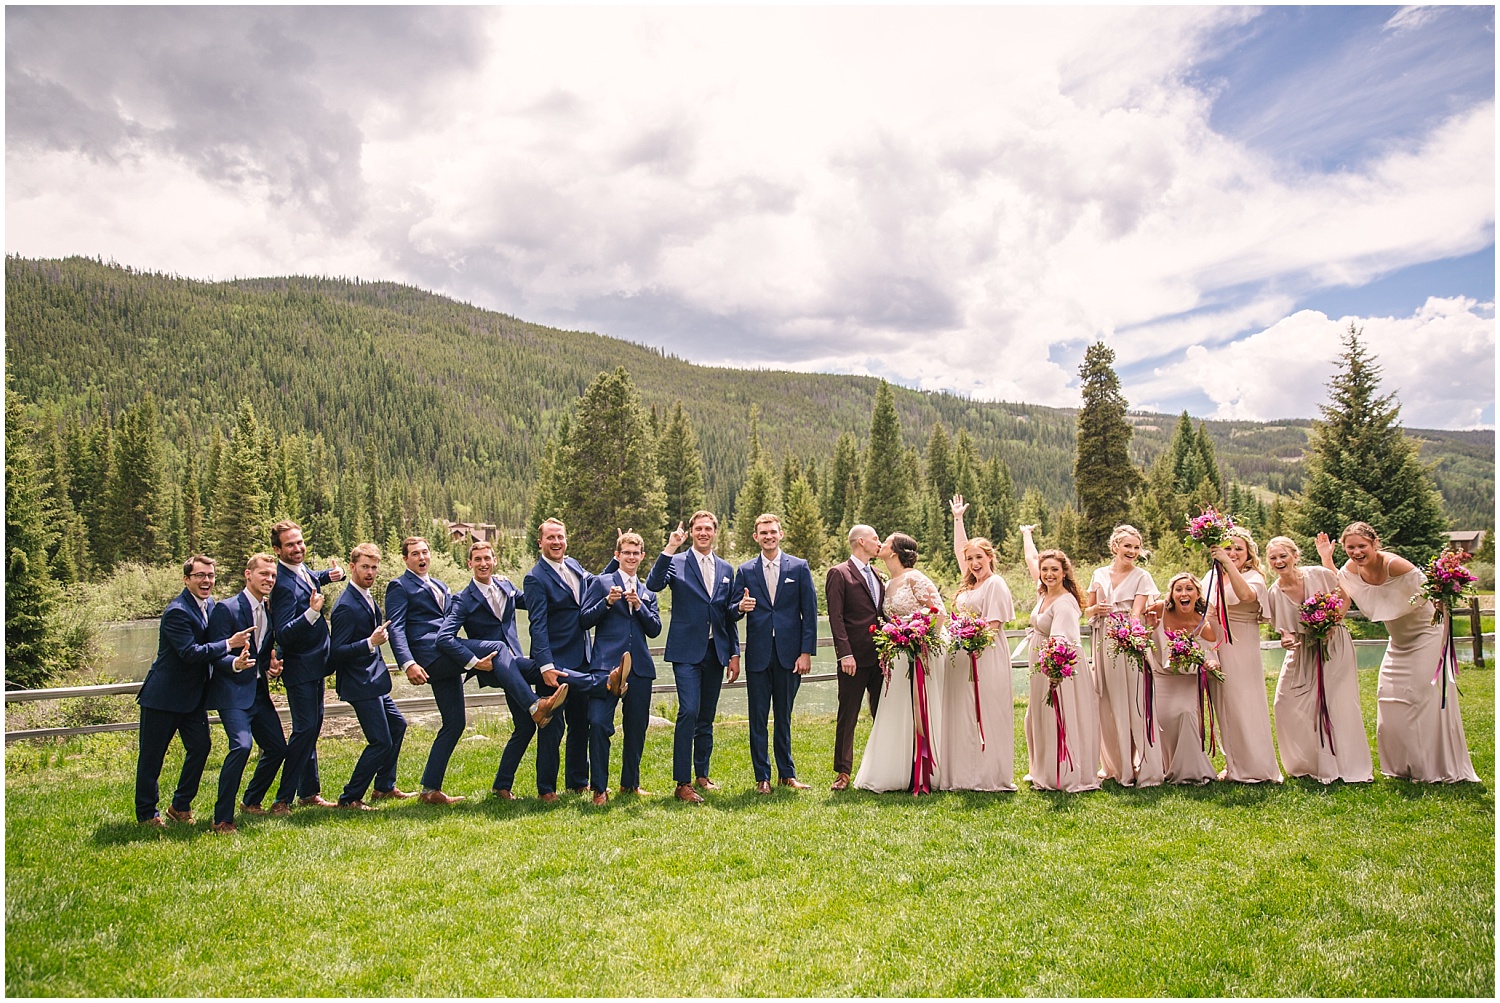 Silly wedding party pictures at Ski Tip Lodge wedding in Keystone Colorado